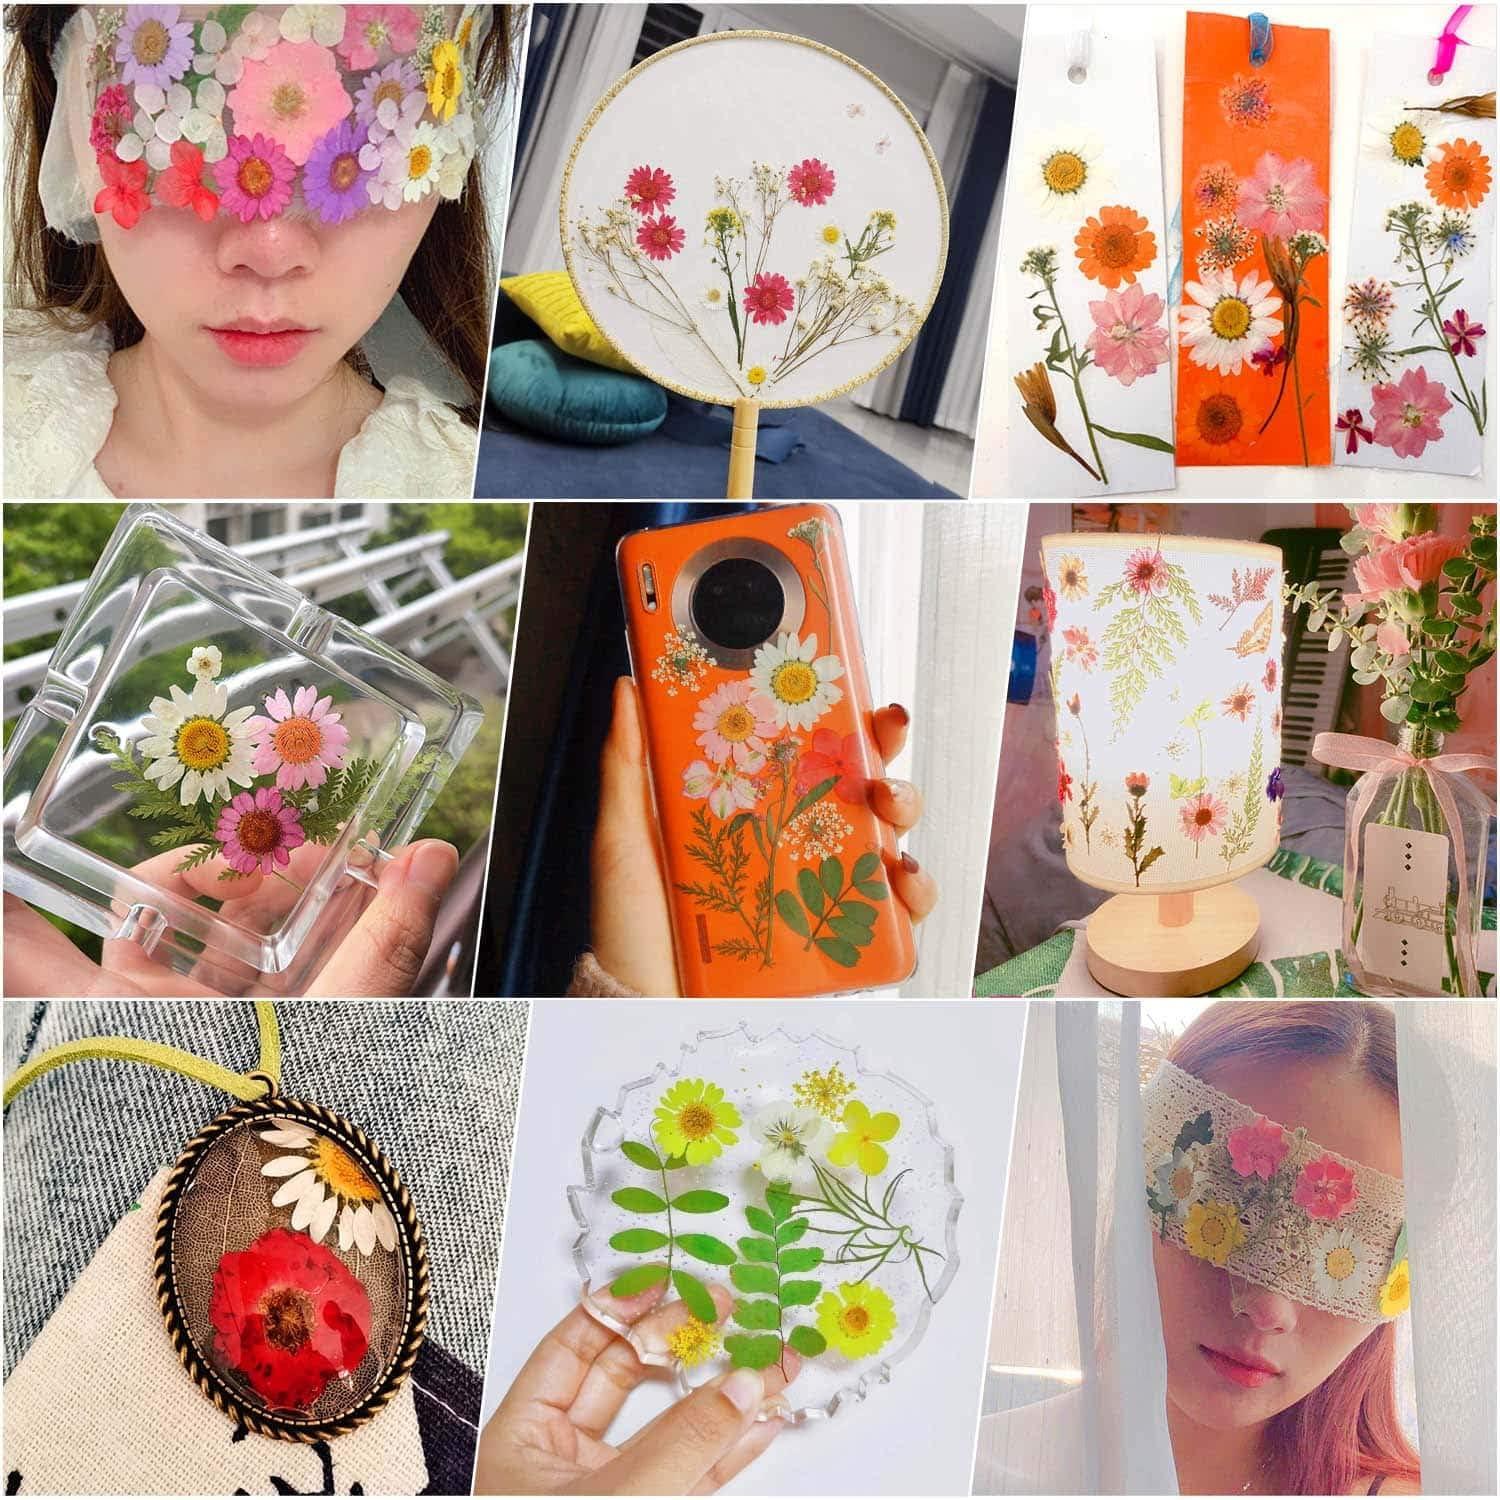 Thrilez 100Pcs Pressed Dried Flowers for Resin Molds Natural Dried